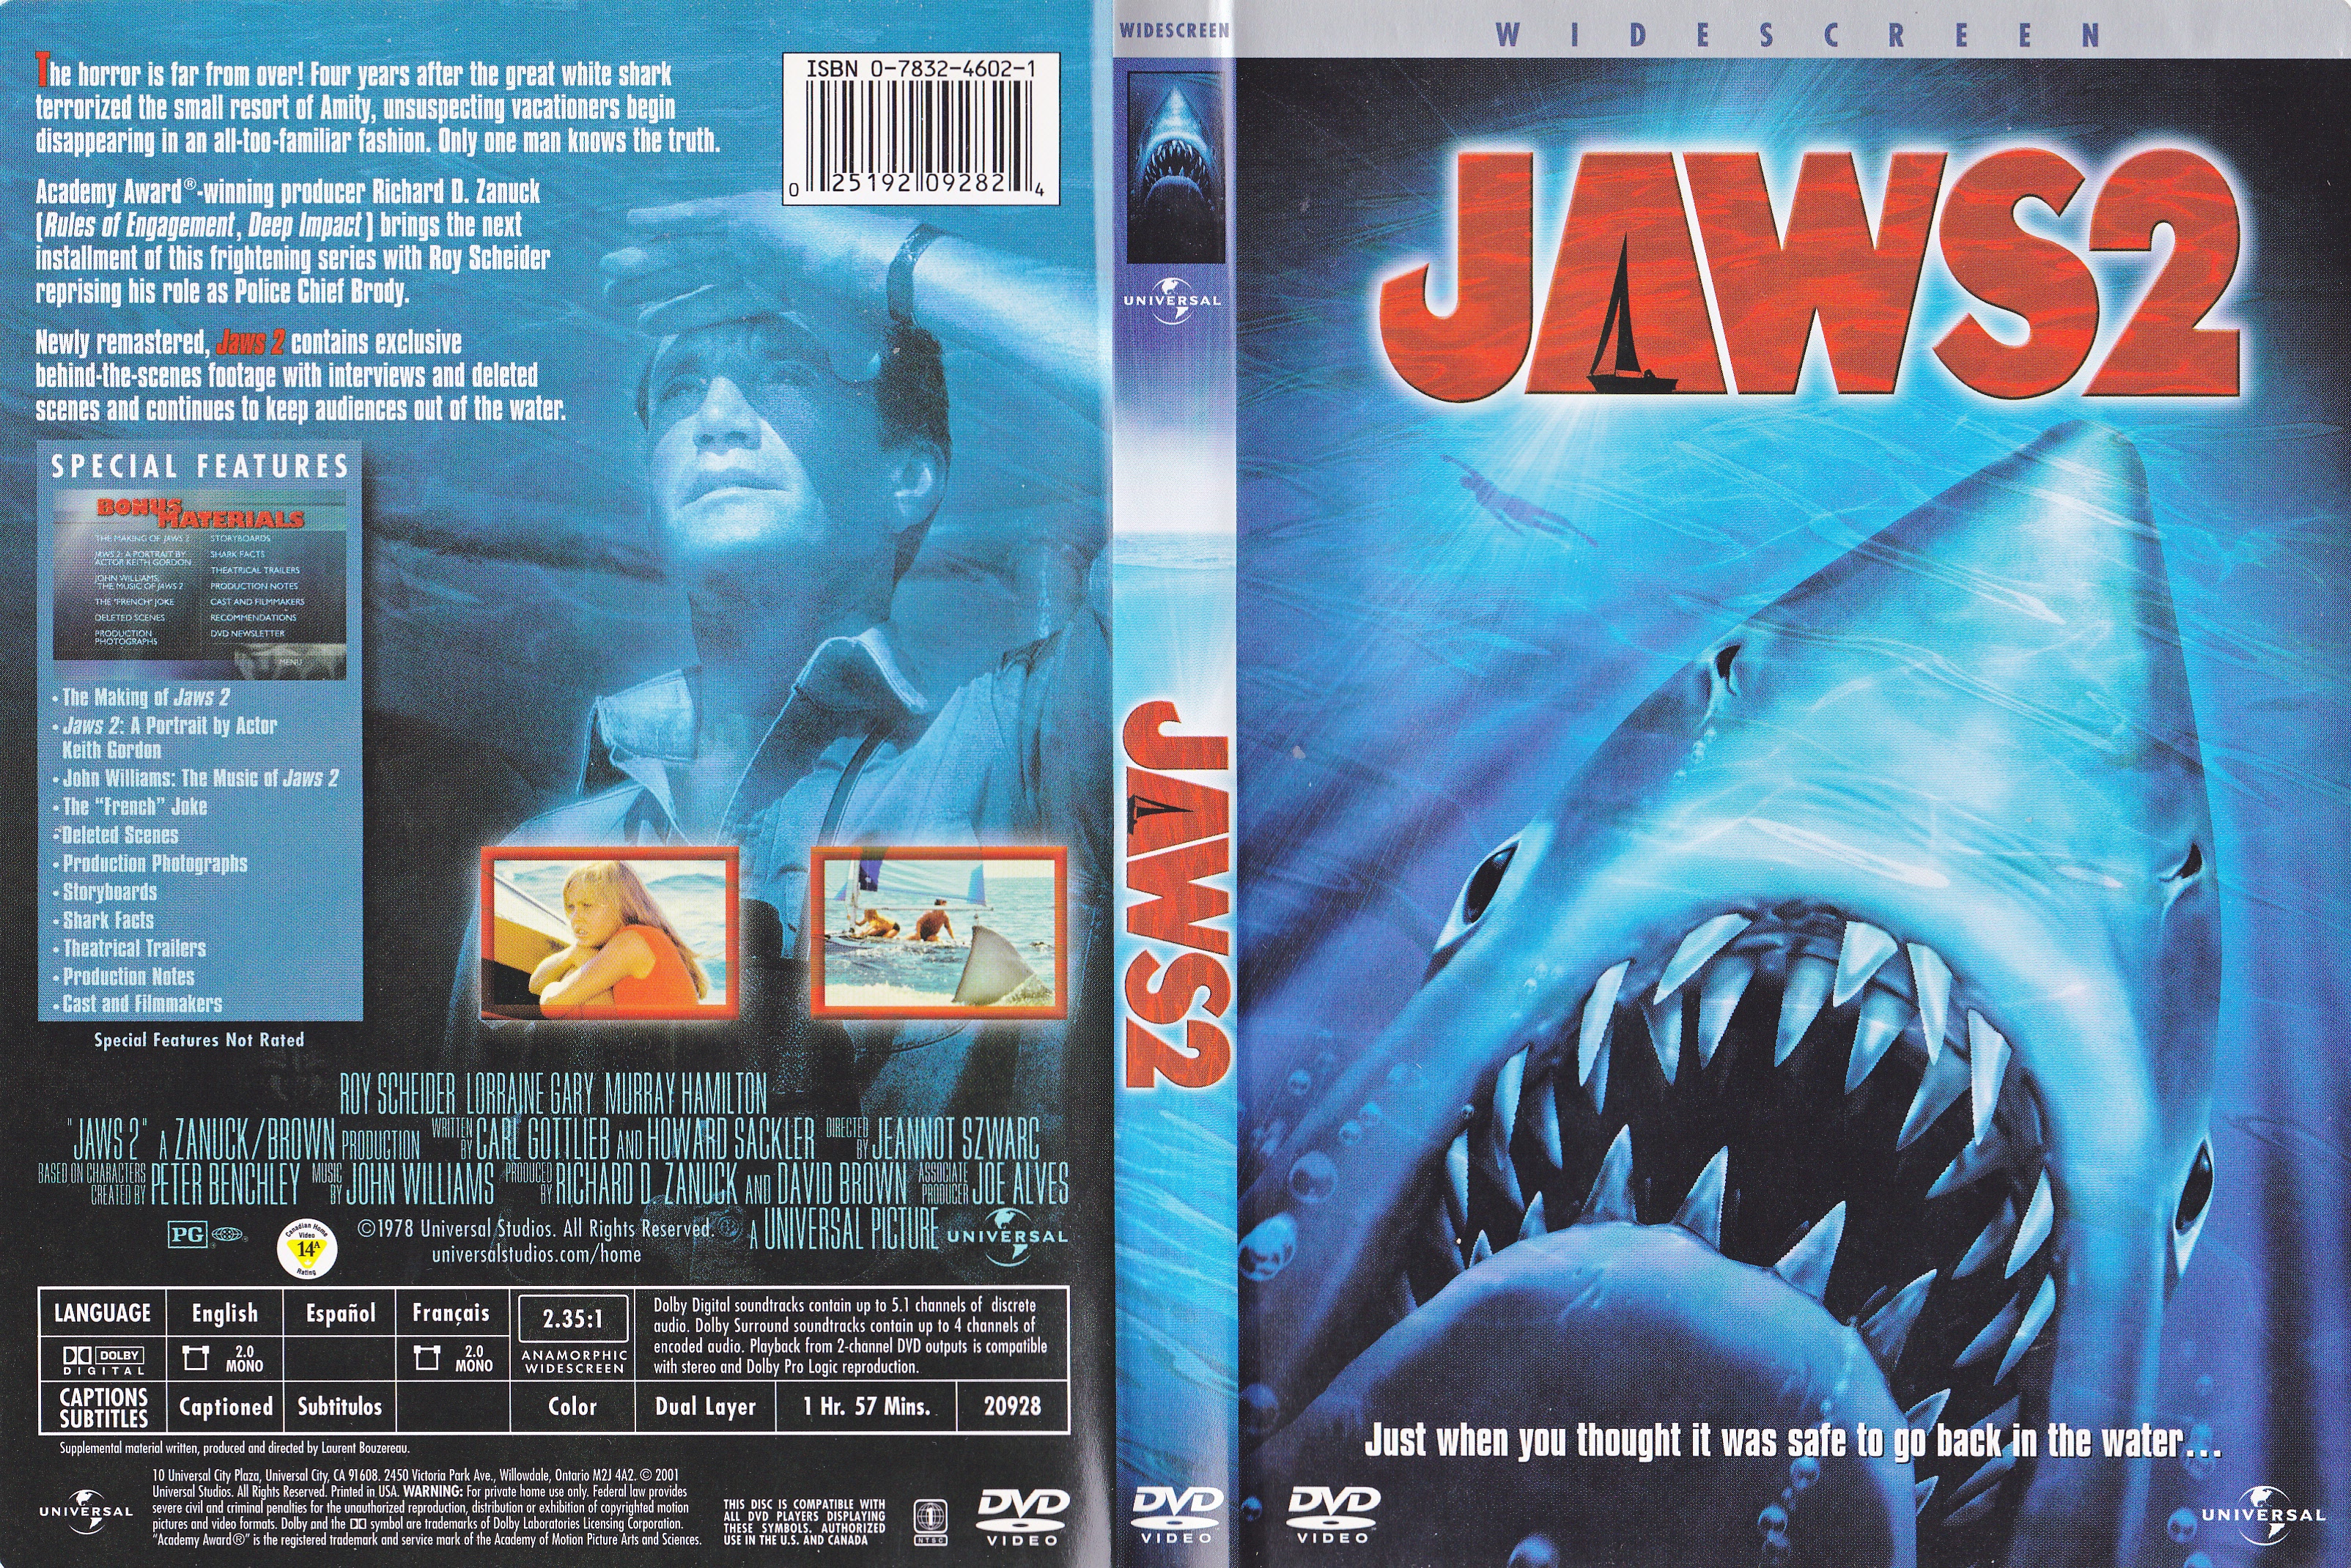 Jaquette DVD Jaws 2 (Canadienne)